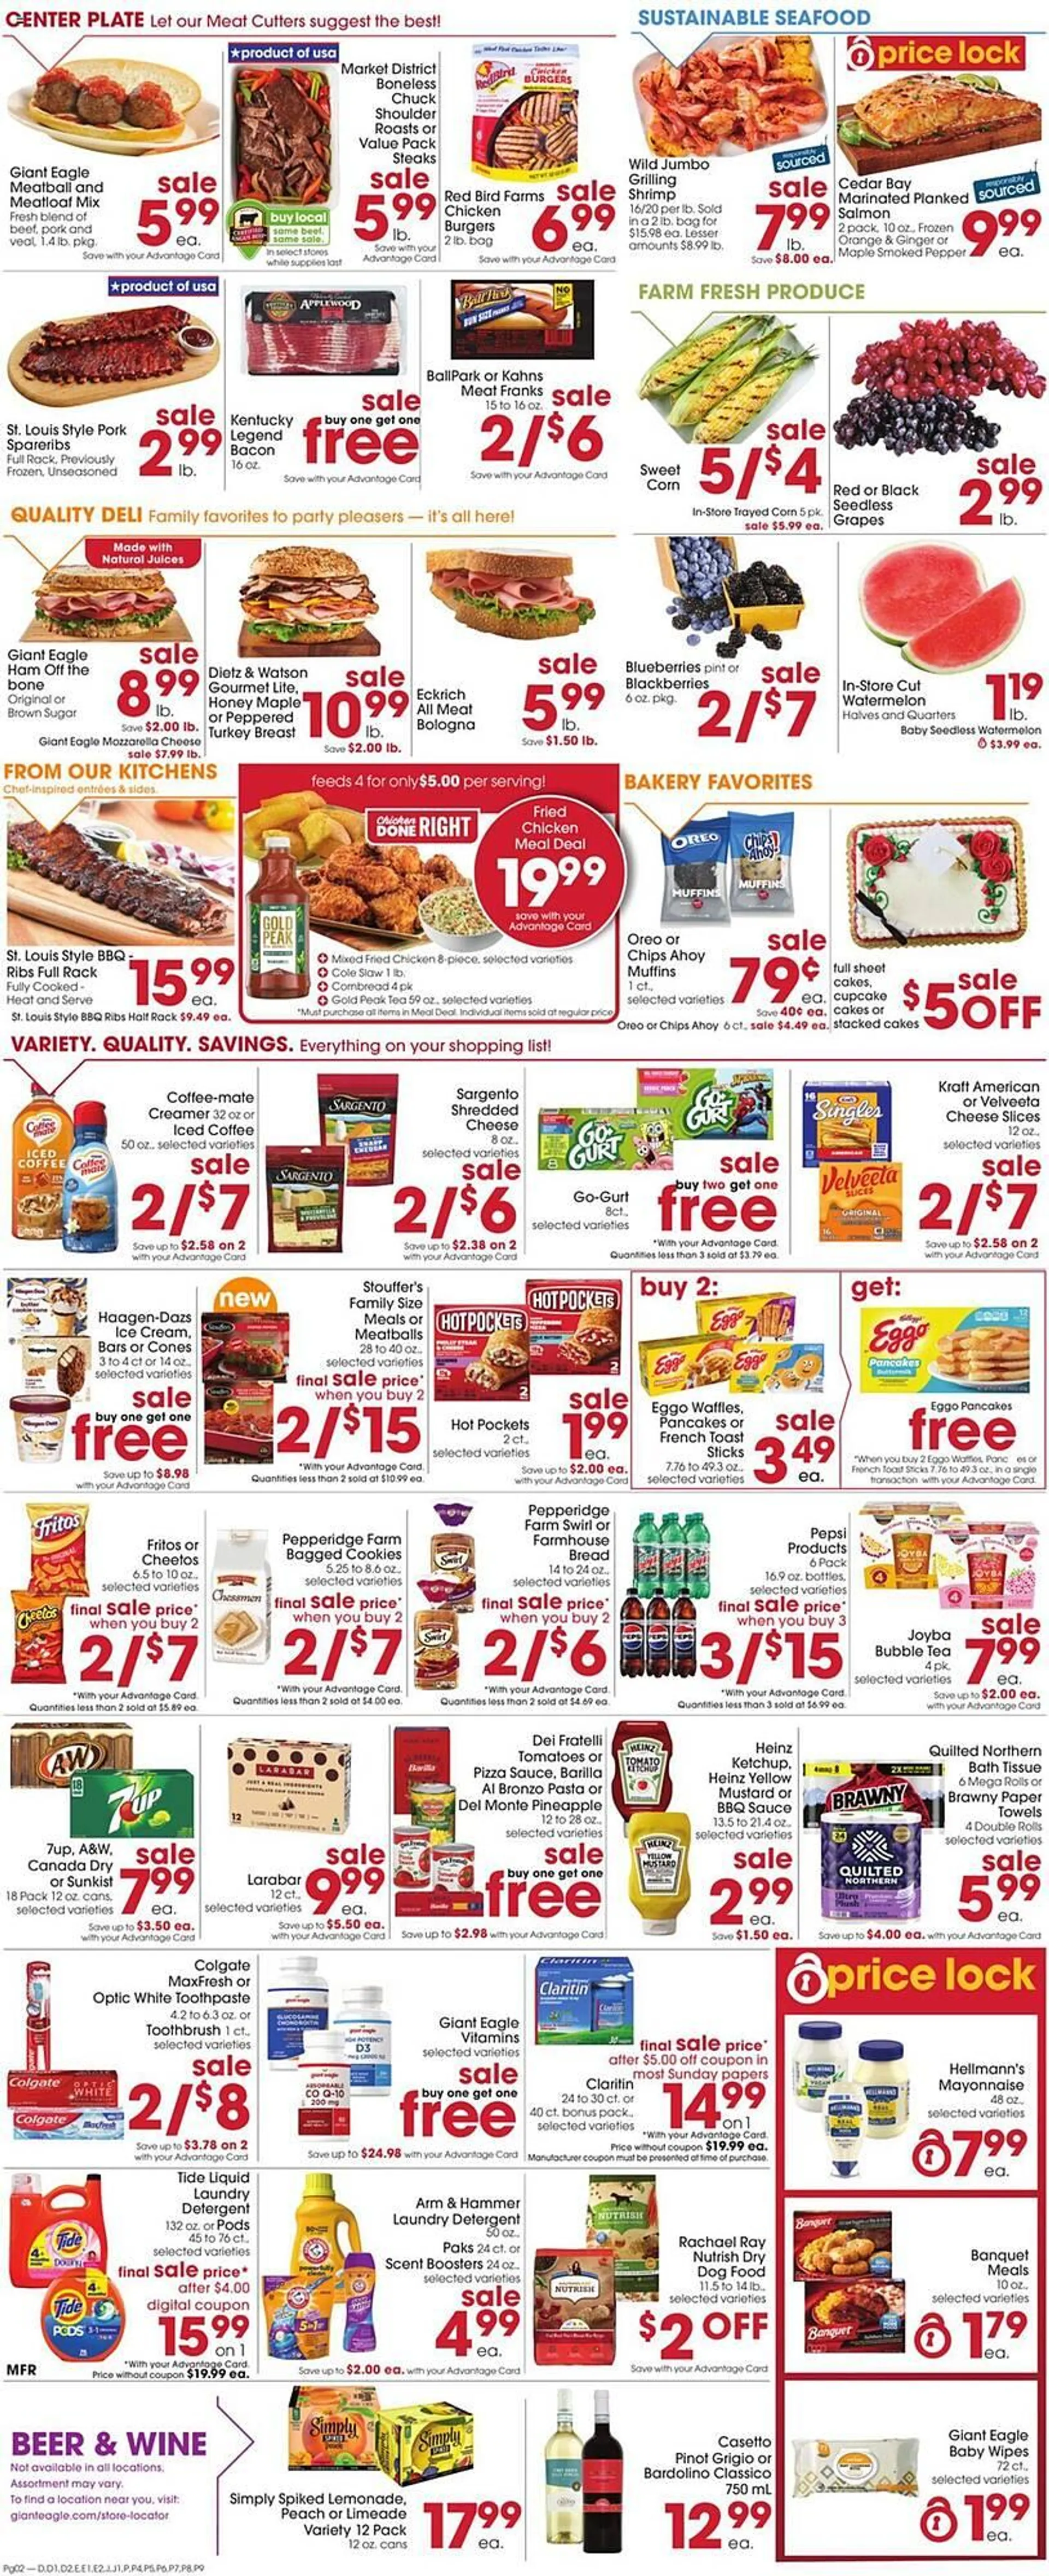 Giant Eagle Weekly Ad - 2